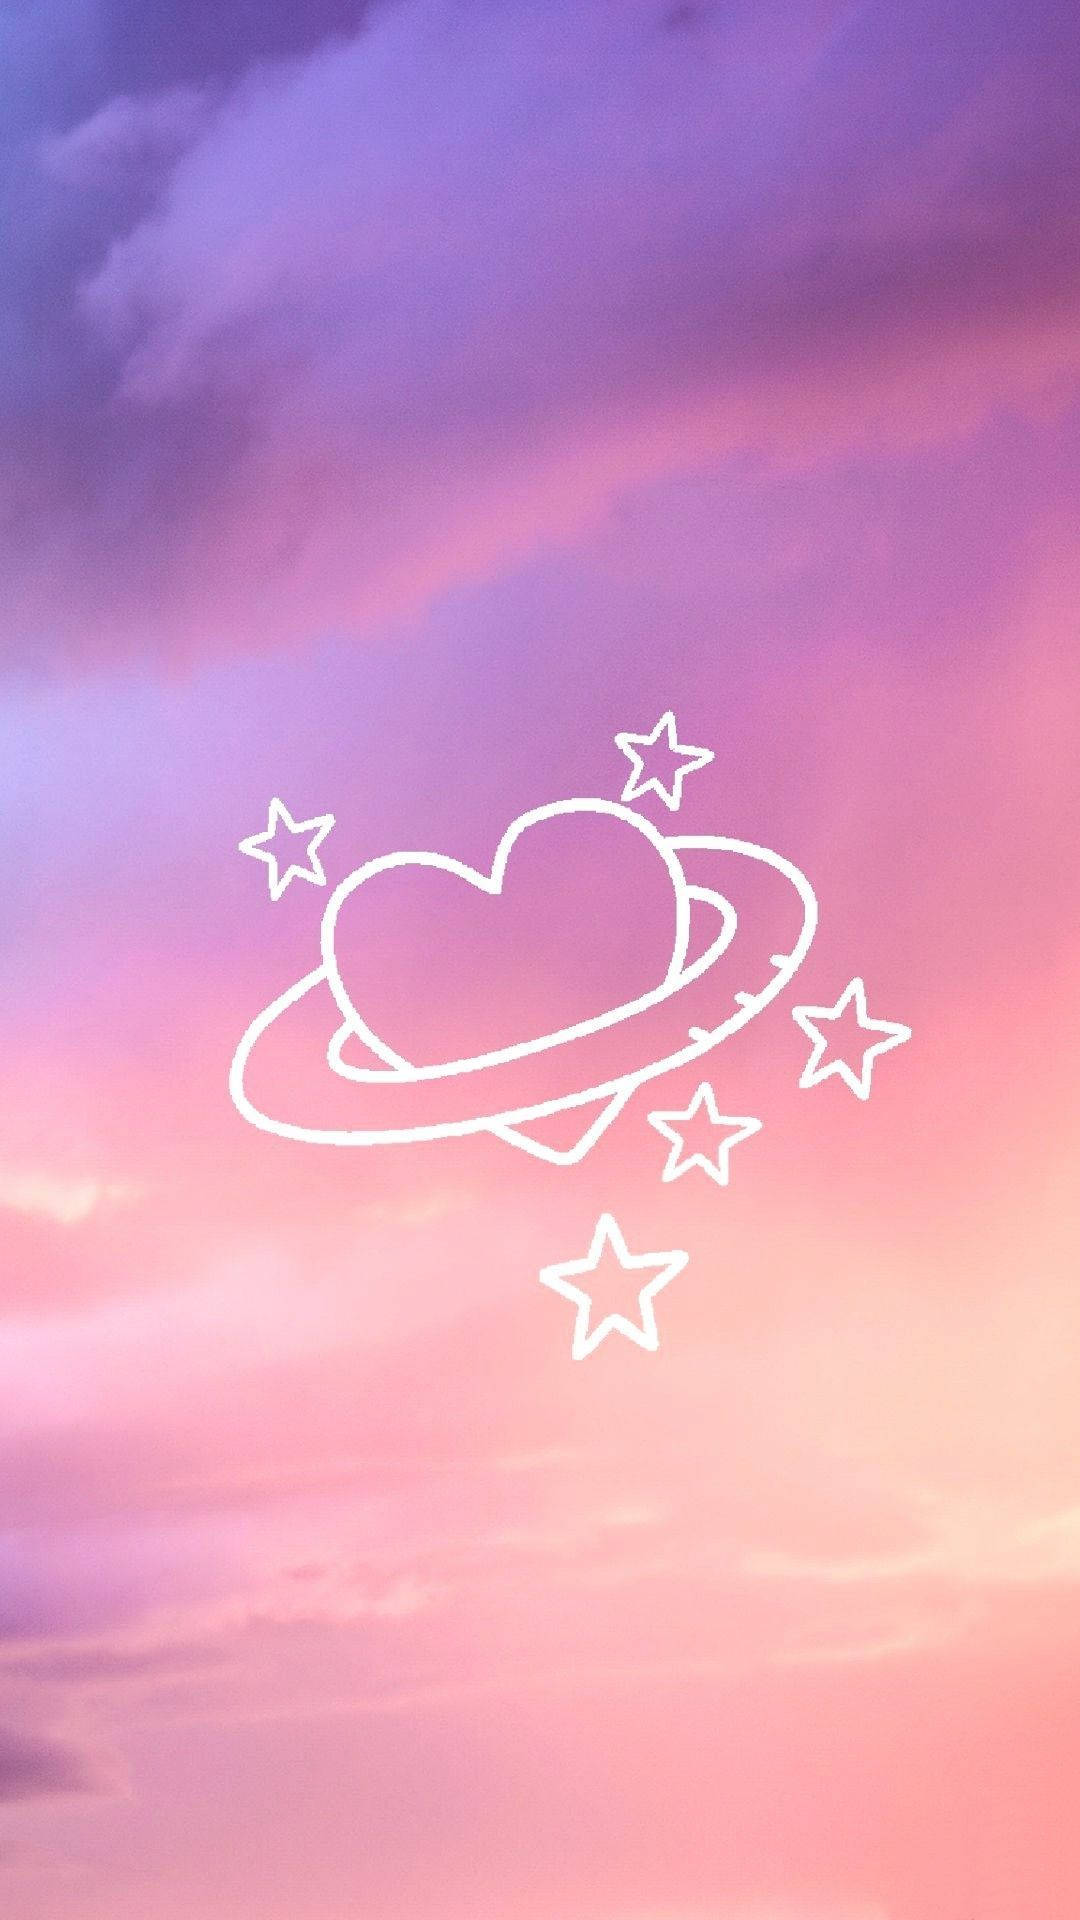 Aesthetic Profile Heart And Stars Wallpaper